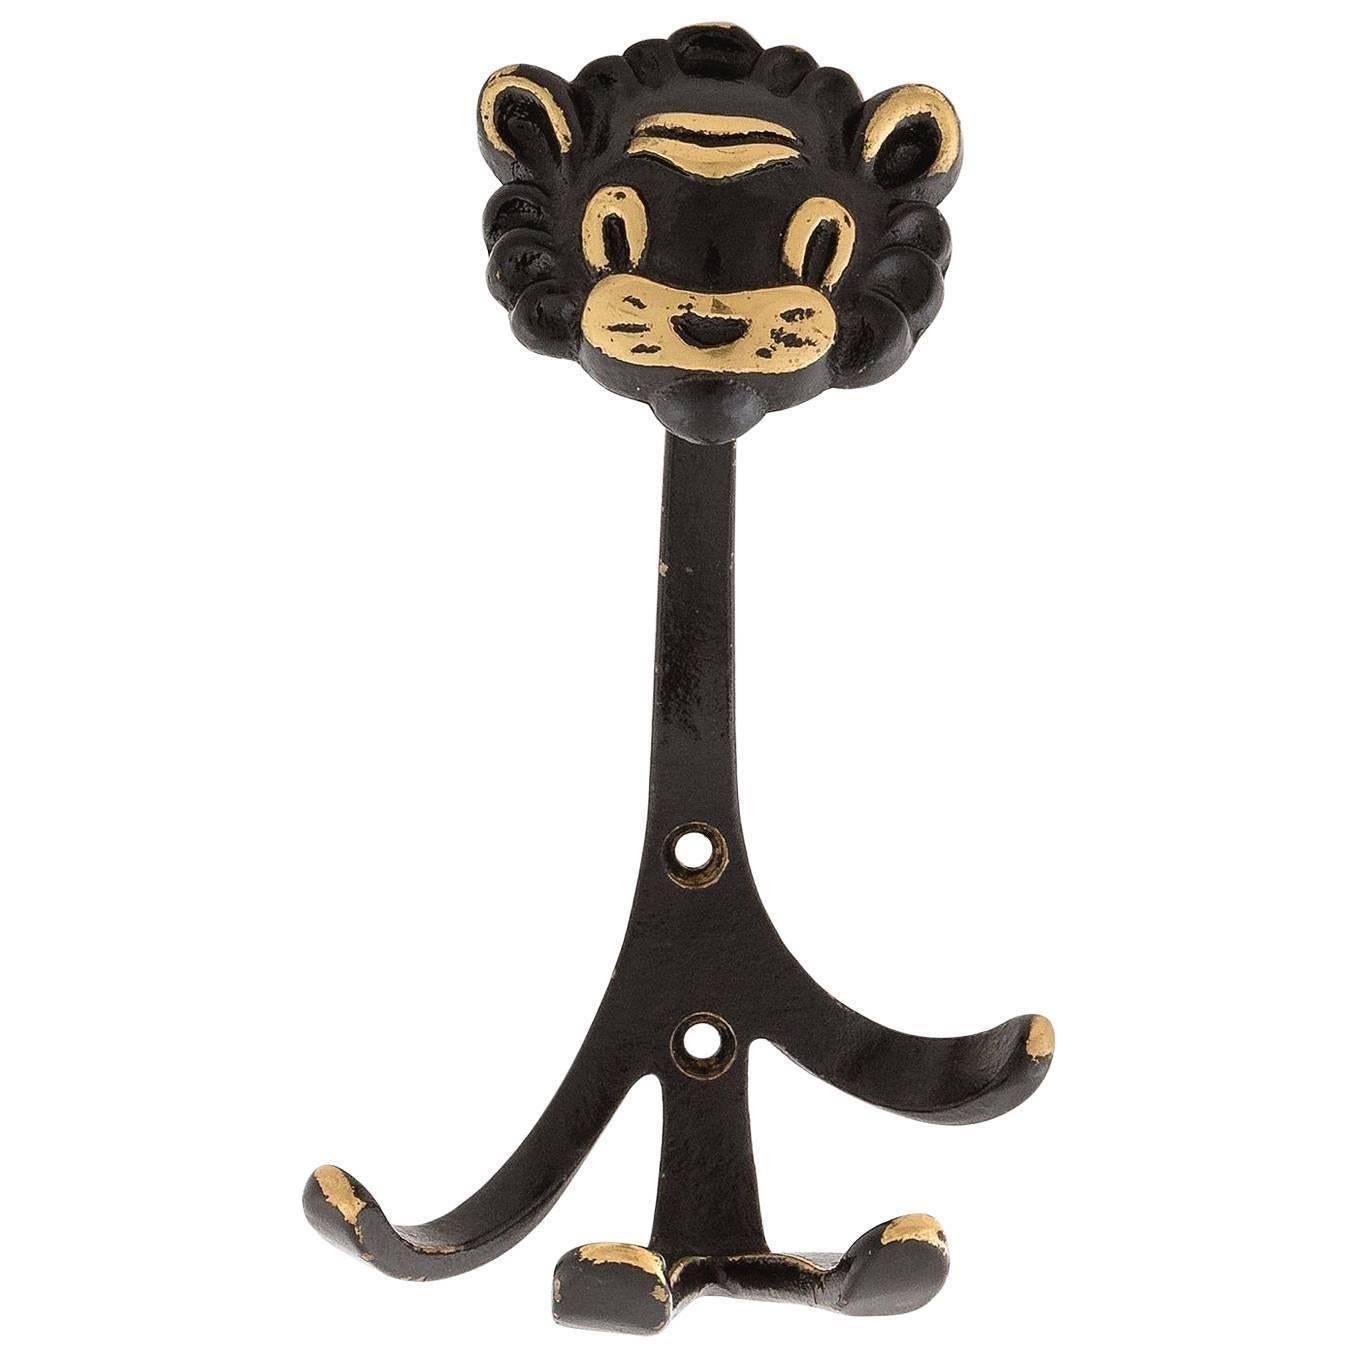 A set of six wall hooks in the form of three bulls, two monkeys, and one lion by Walter Bosse, Austria, manufactured in midcentury in 1950s. They are made of blackened and partly polished brass. 
Wear of use, lovely patina. 
The price is per hook.